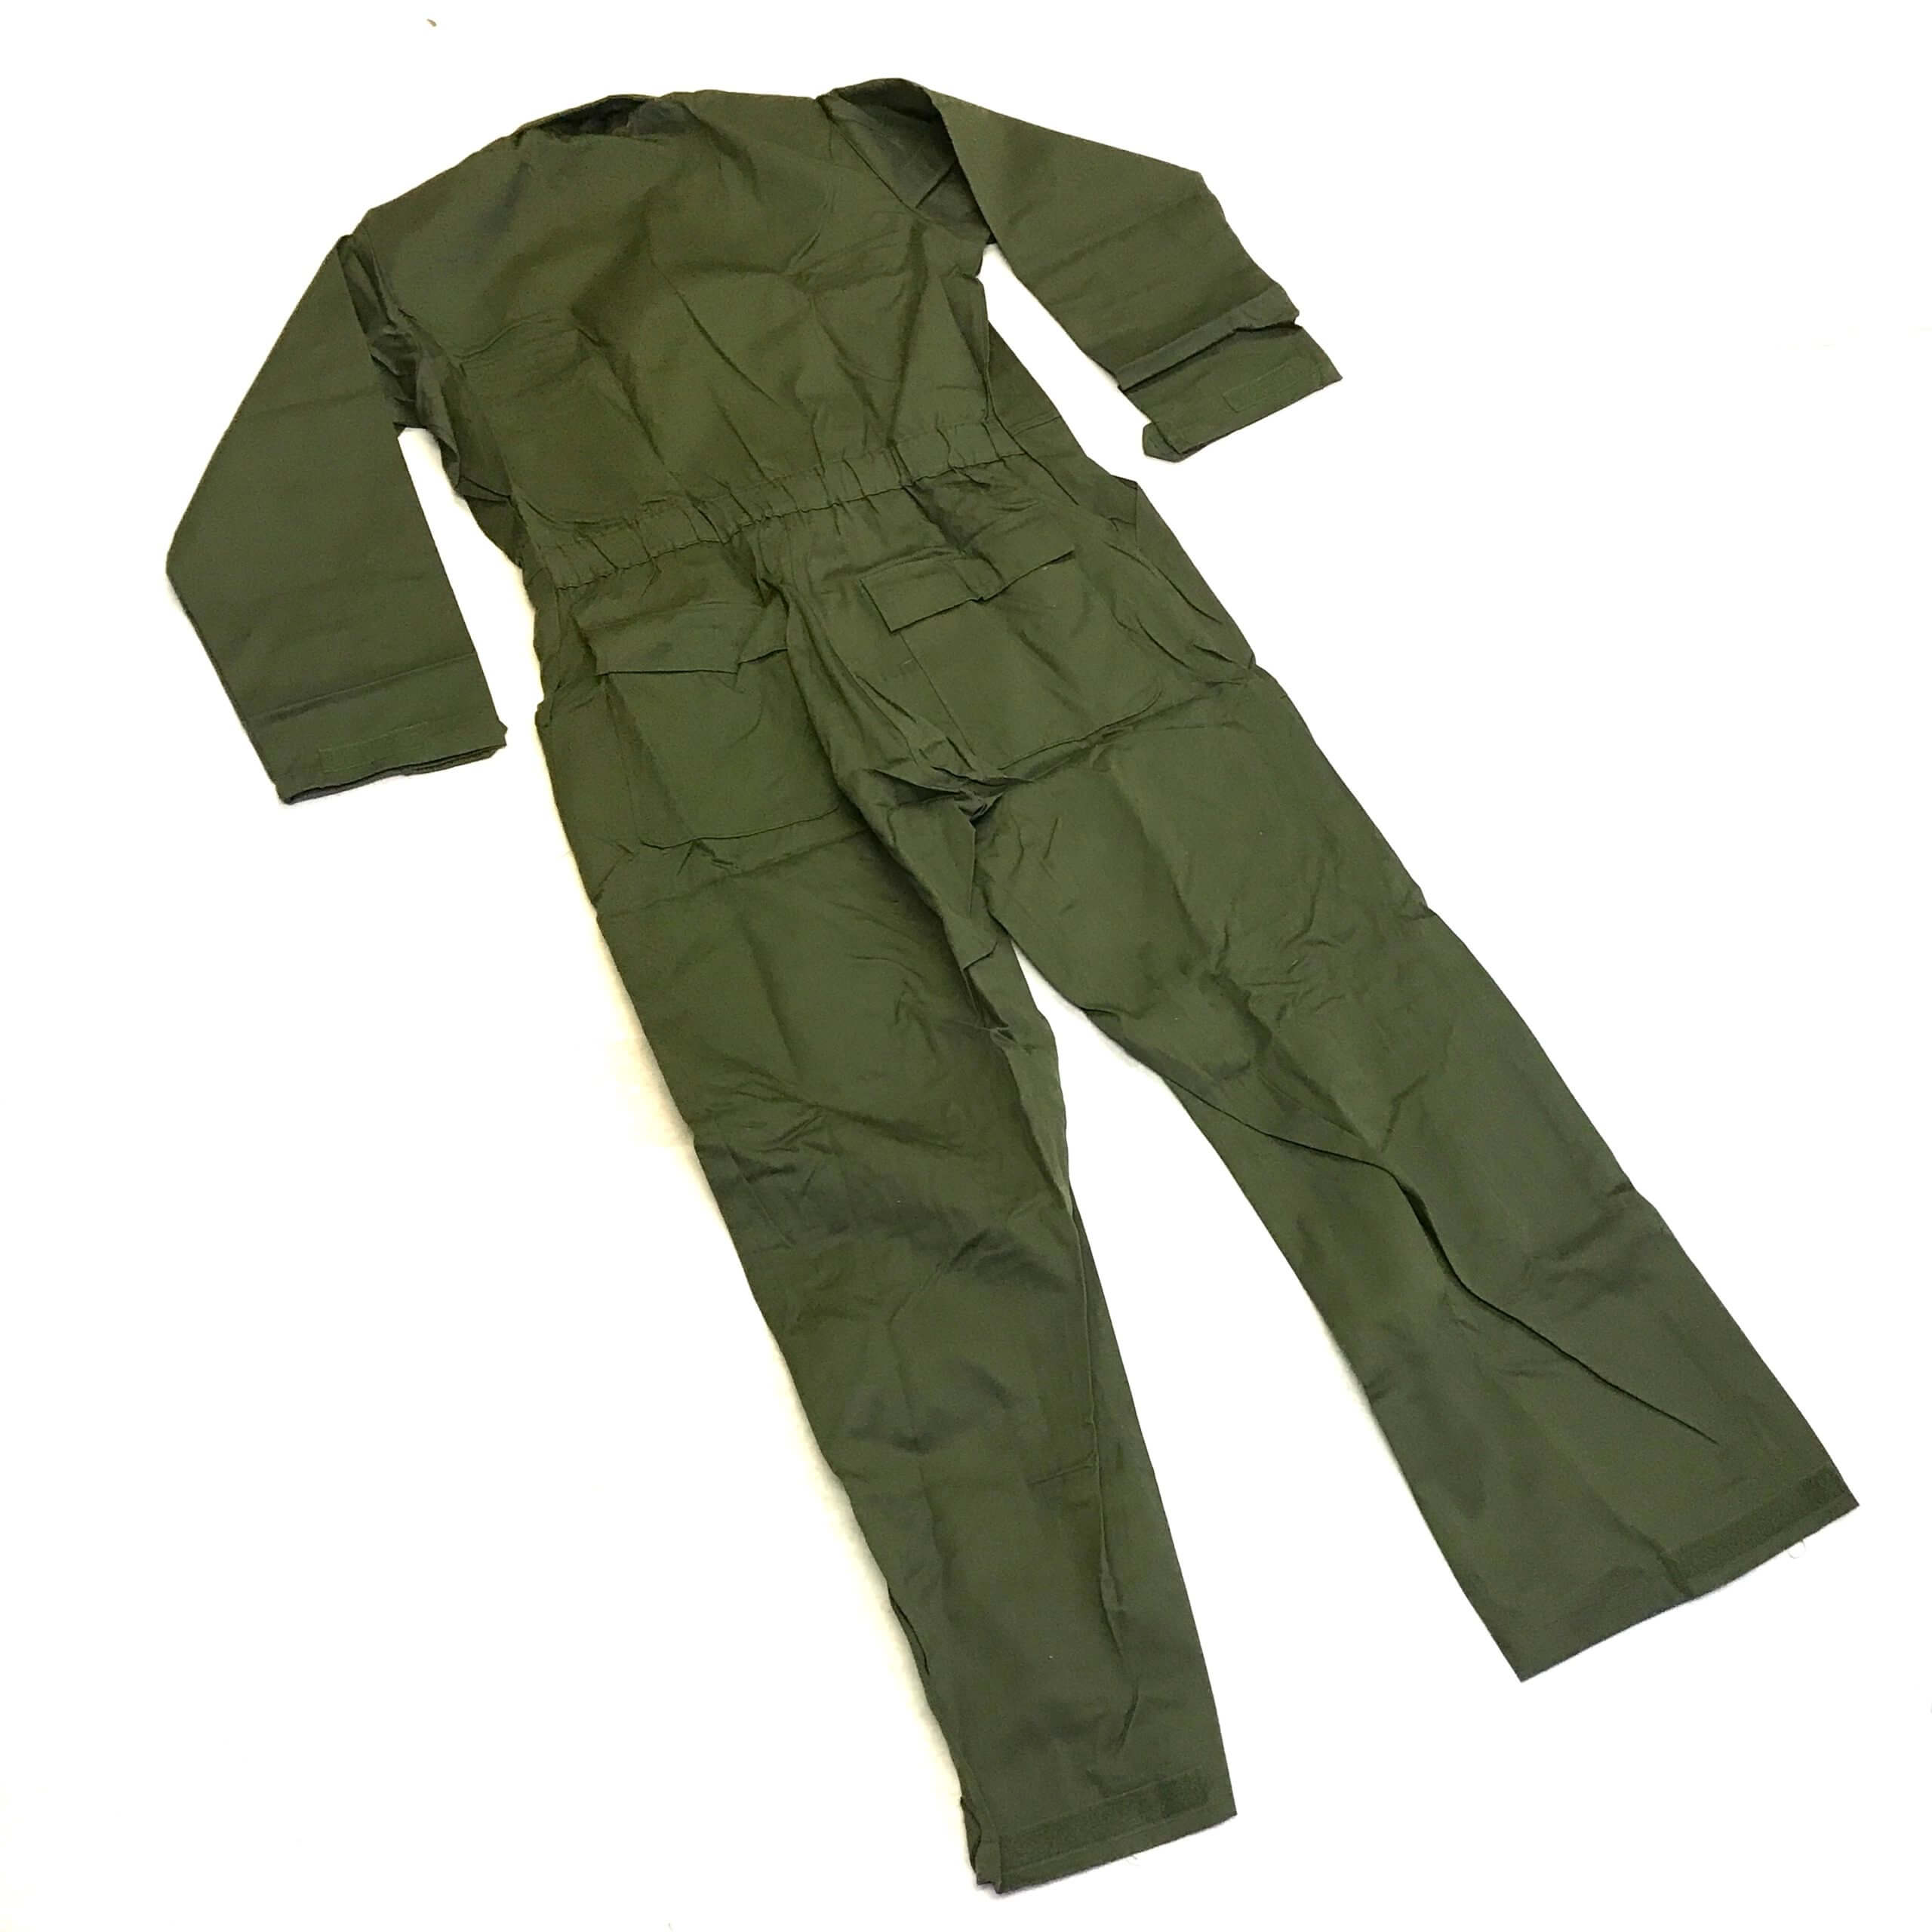 Military Utility Coveralls, OD Green for Sale - [Genuine Issue]